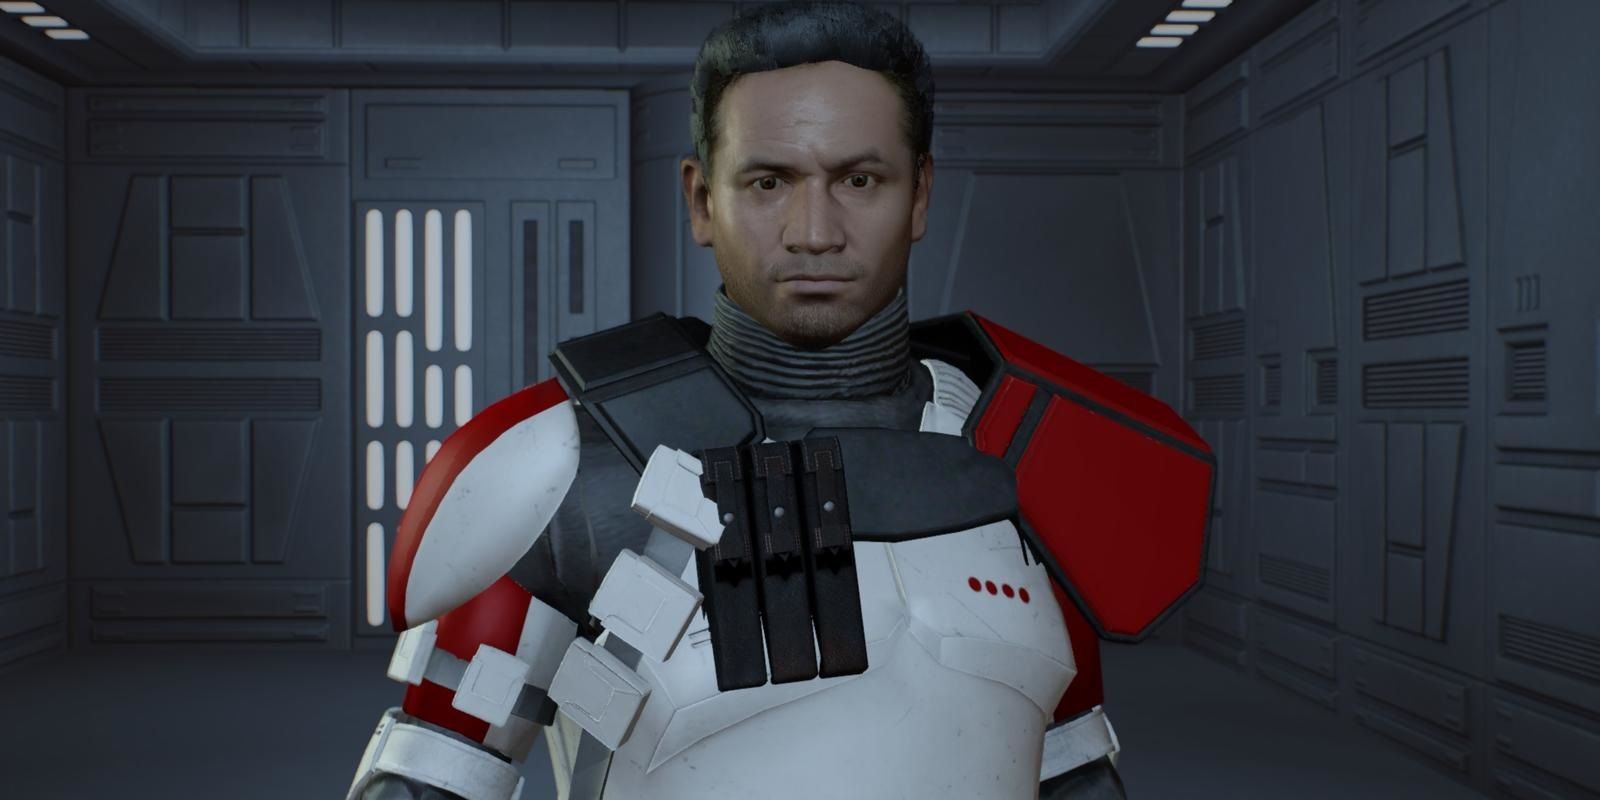 An image of clone trooper Ordo from Star Wars, with his helmet off